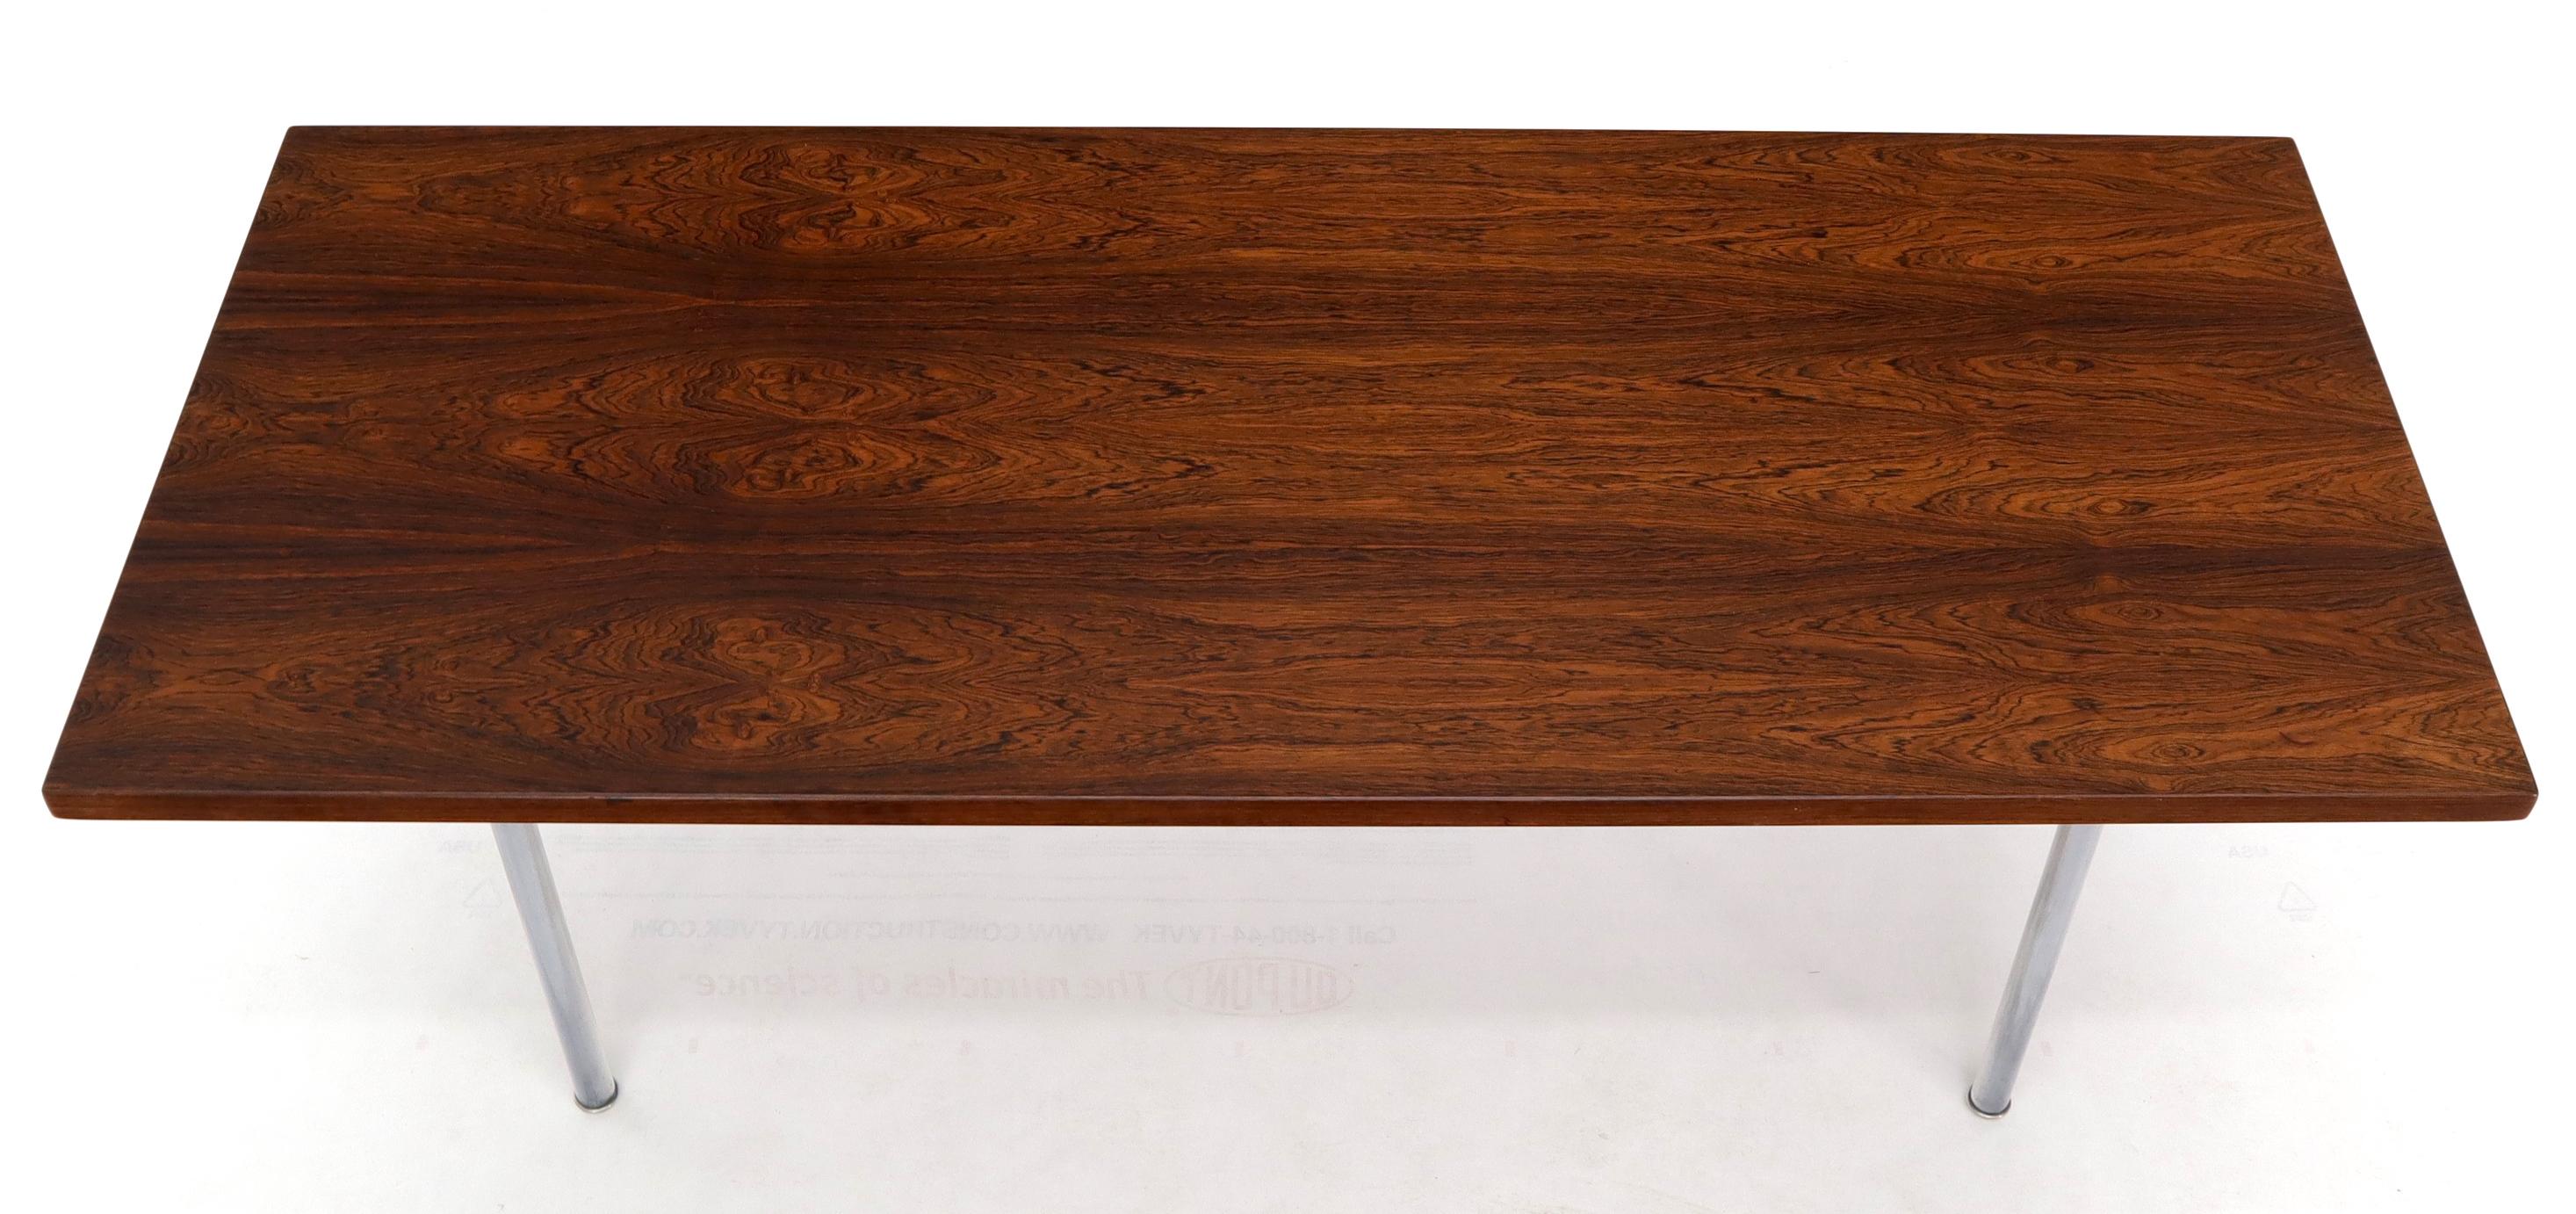 Danish Hans Wegner Signed Rosewood Coffee Table on Chrome Cylinder Legs For Sale